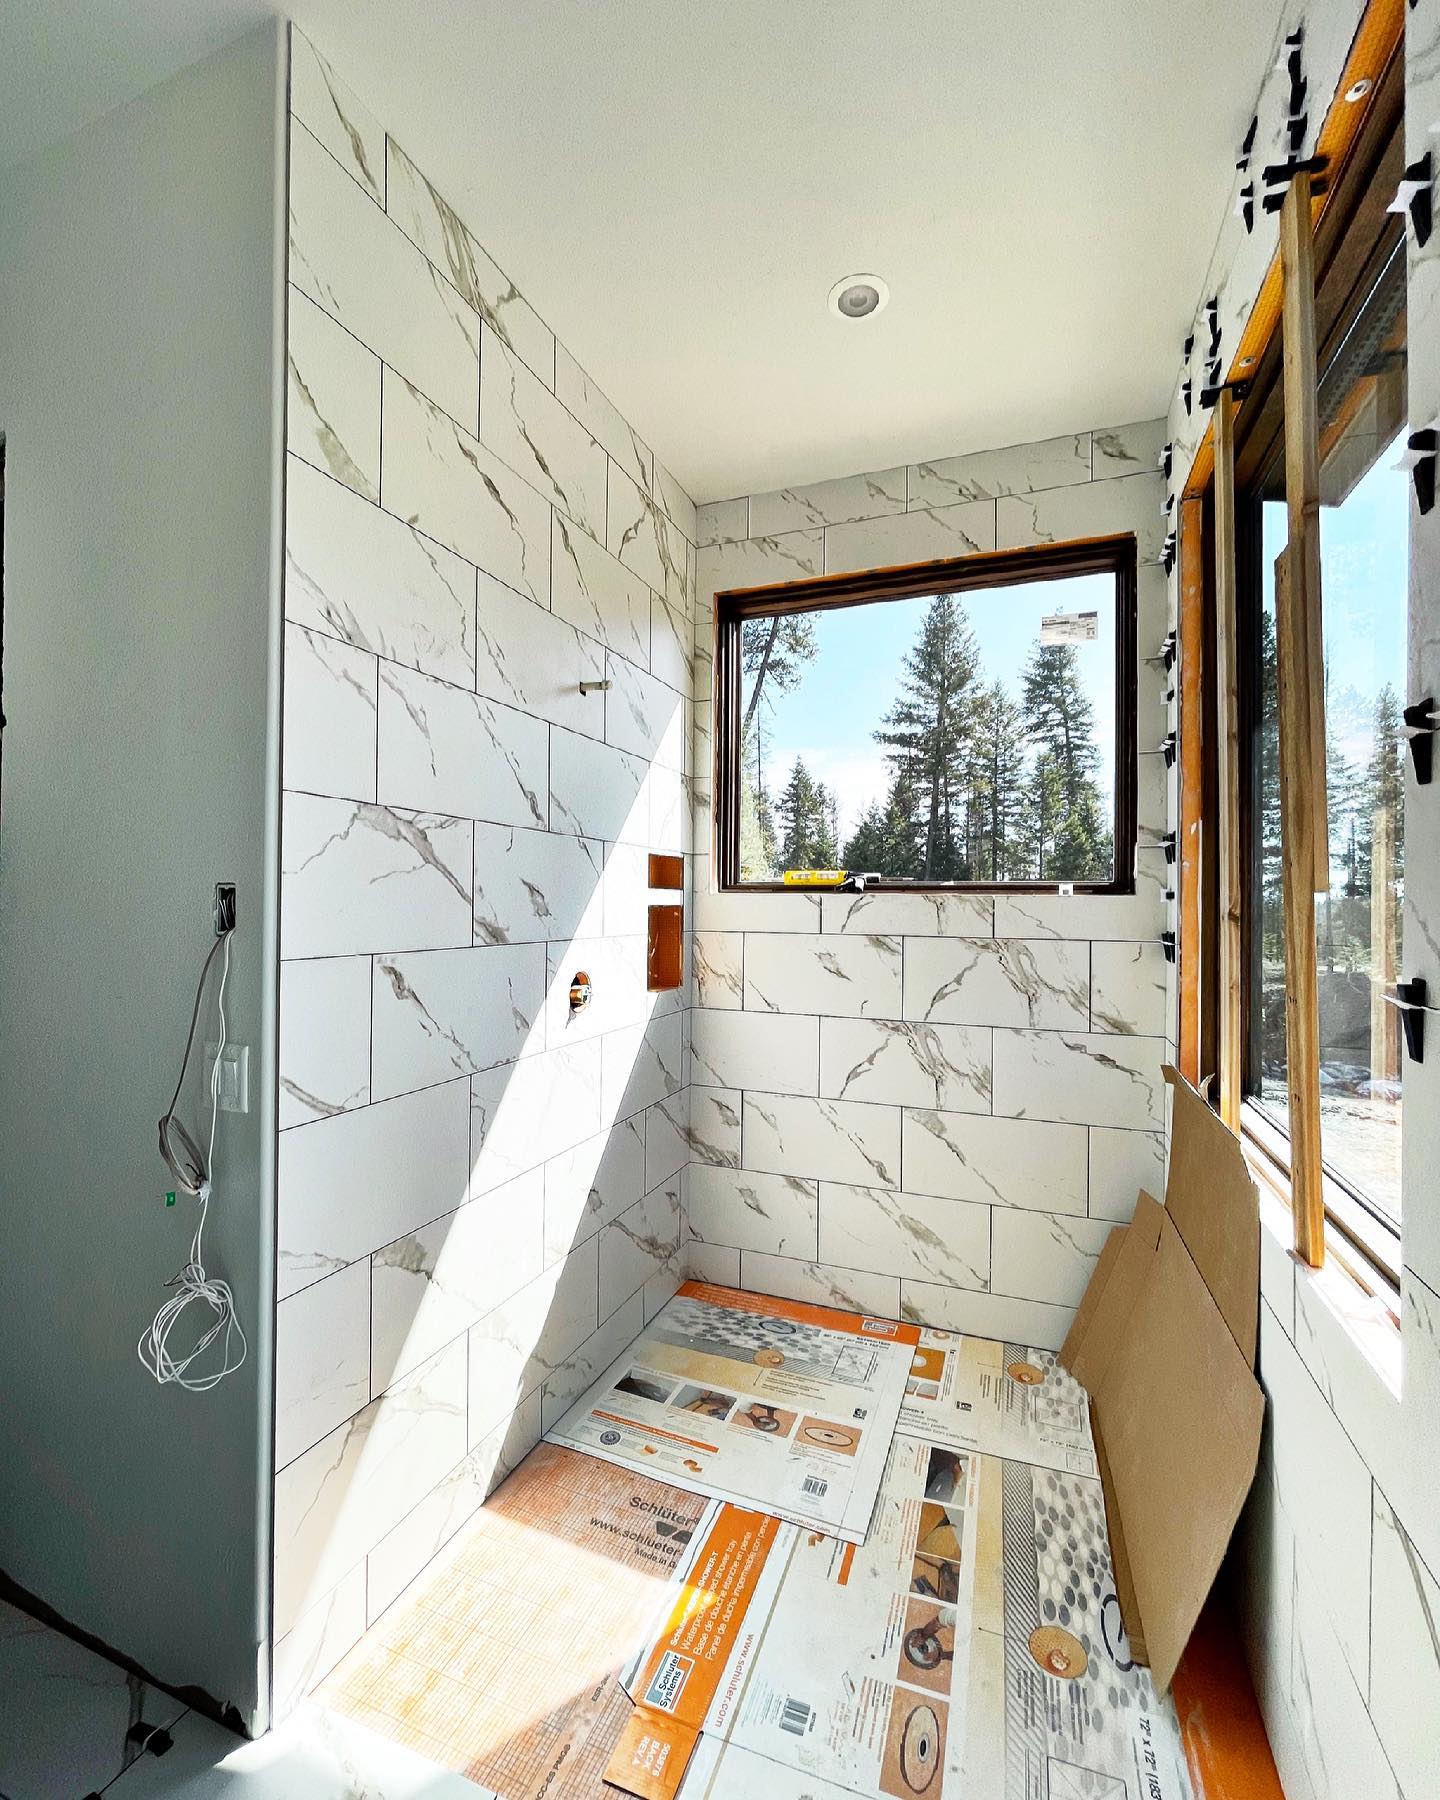 Work in progress. I can’t wait to show this master bathroom when it’s complete. It’s different than anything we’ve done! whitefish custom home builder